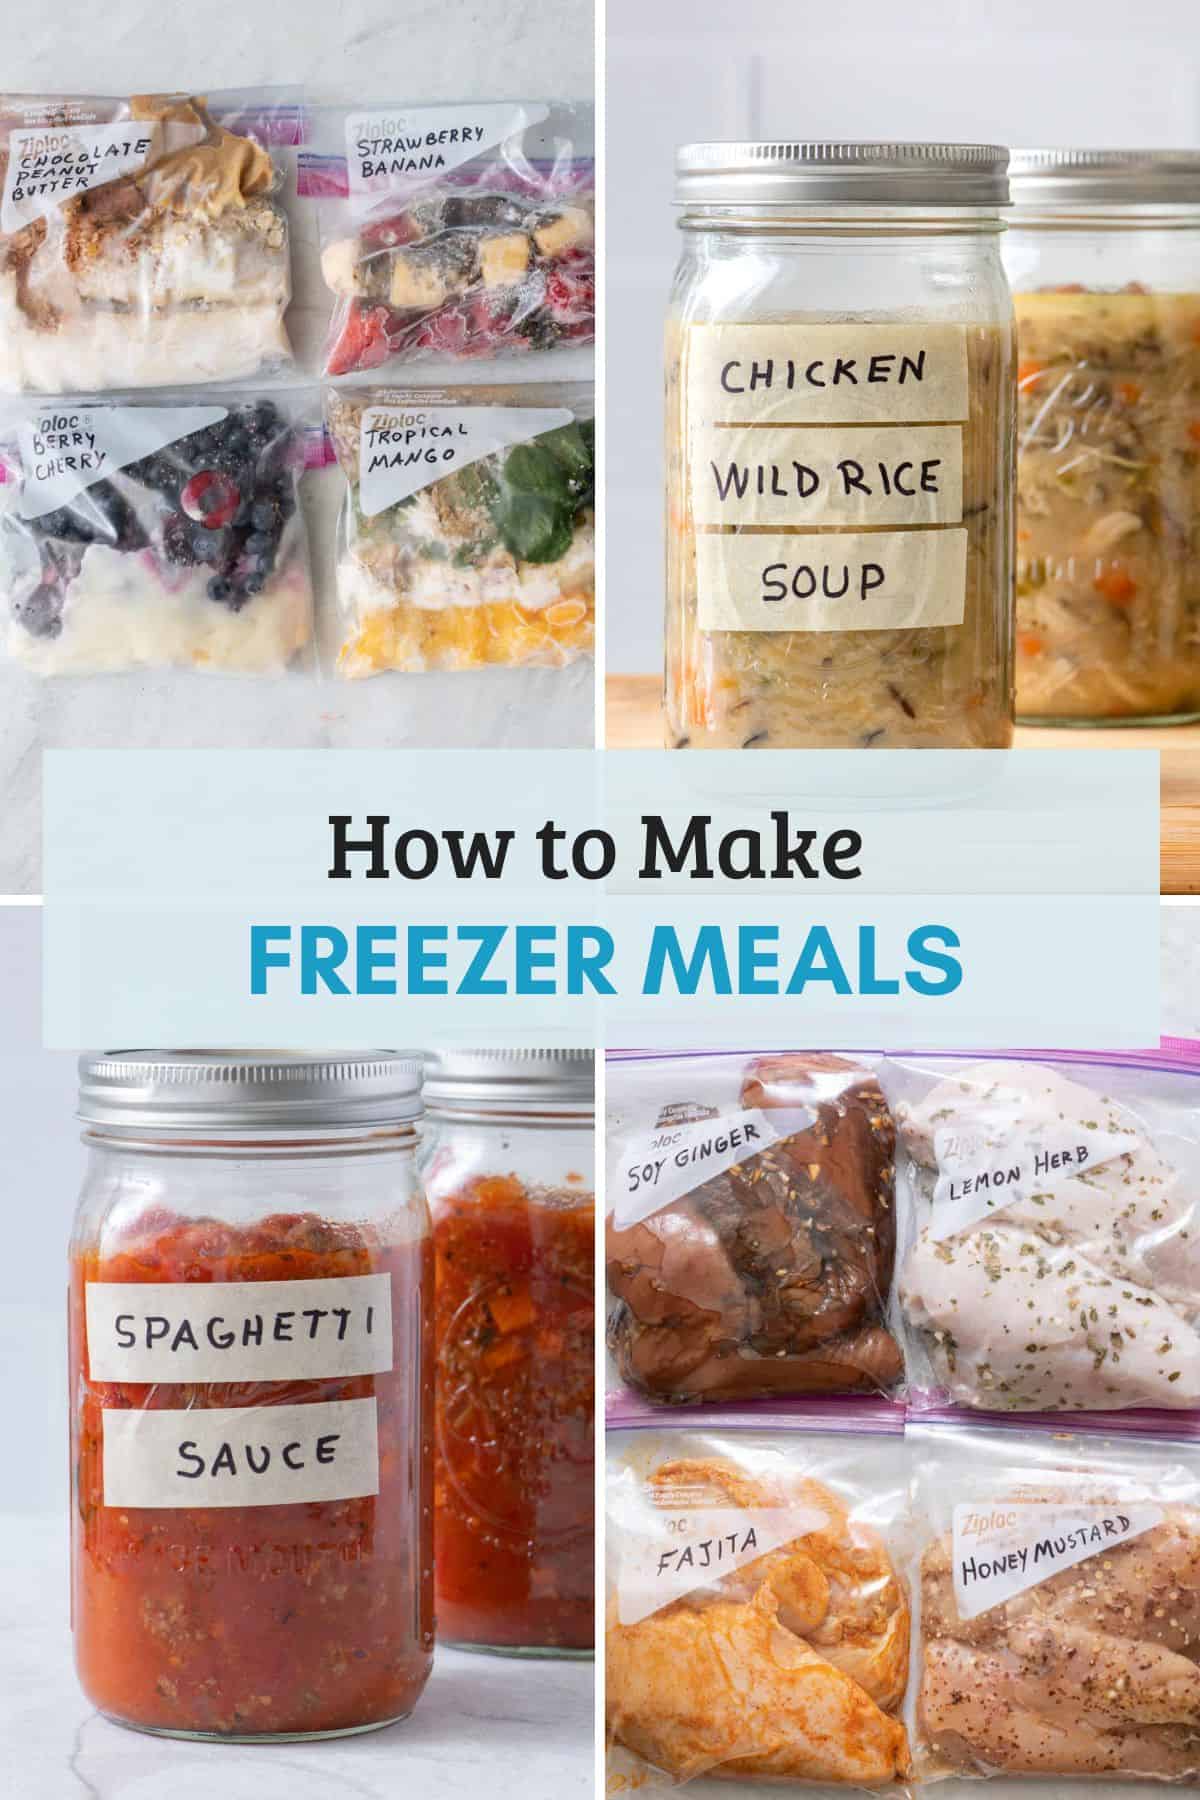 How to Make Freezer Meals for Families {With Recipes} - FeelGoodFoodie